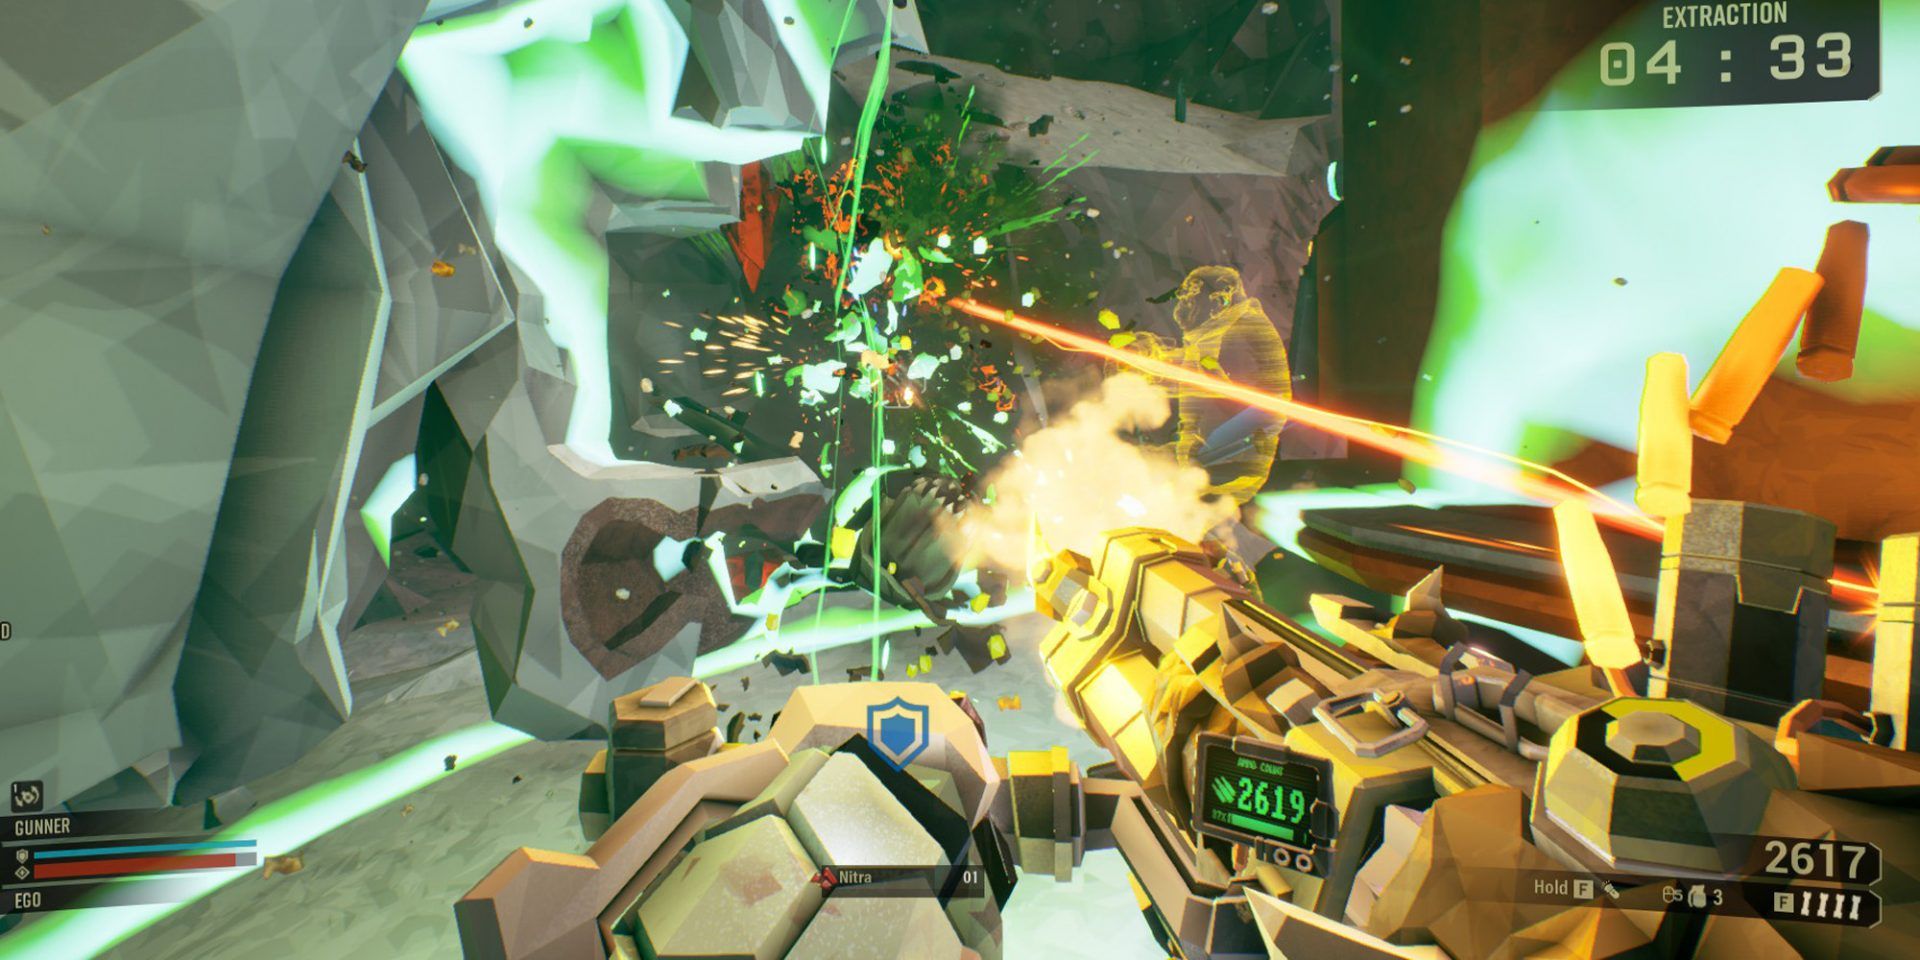 A Gunner in Deep Rock Galactic shooting bugs from the safety of a bubble shield while enemies are distracted